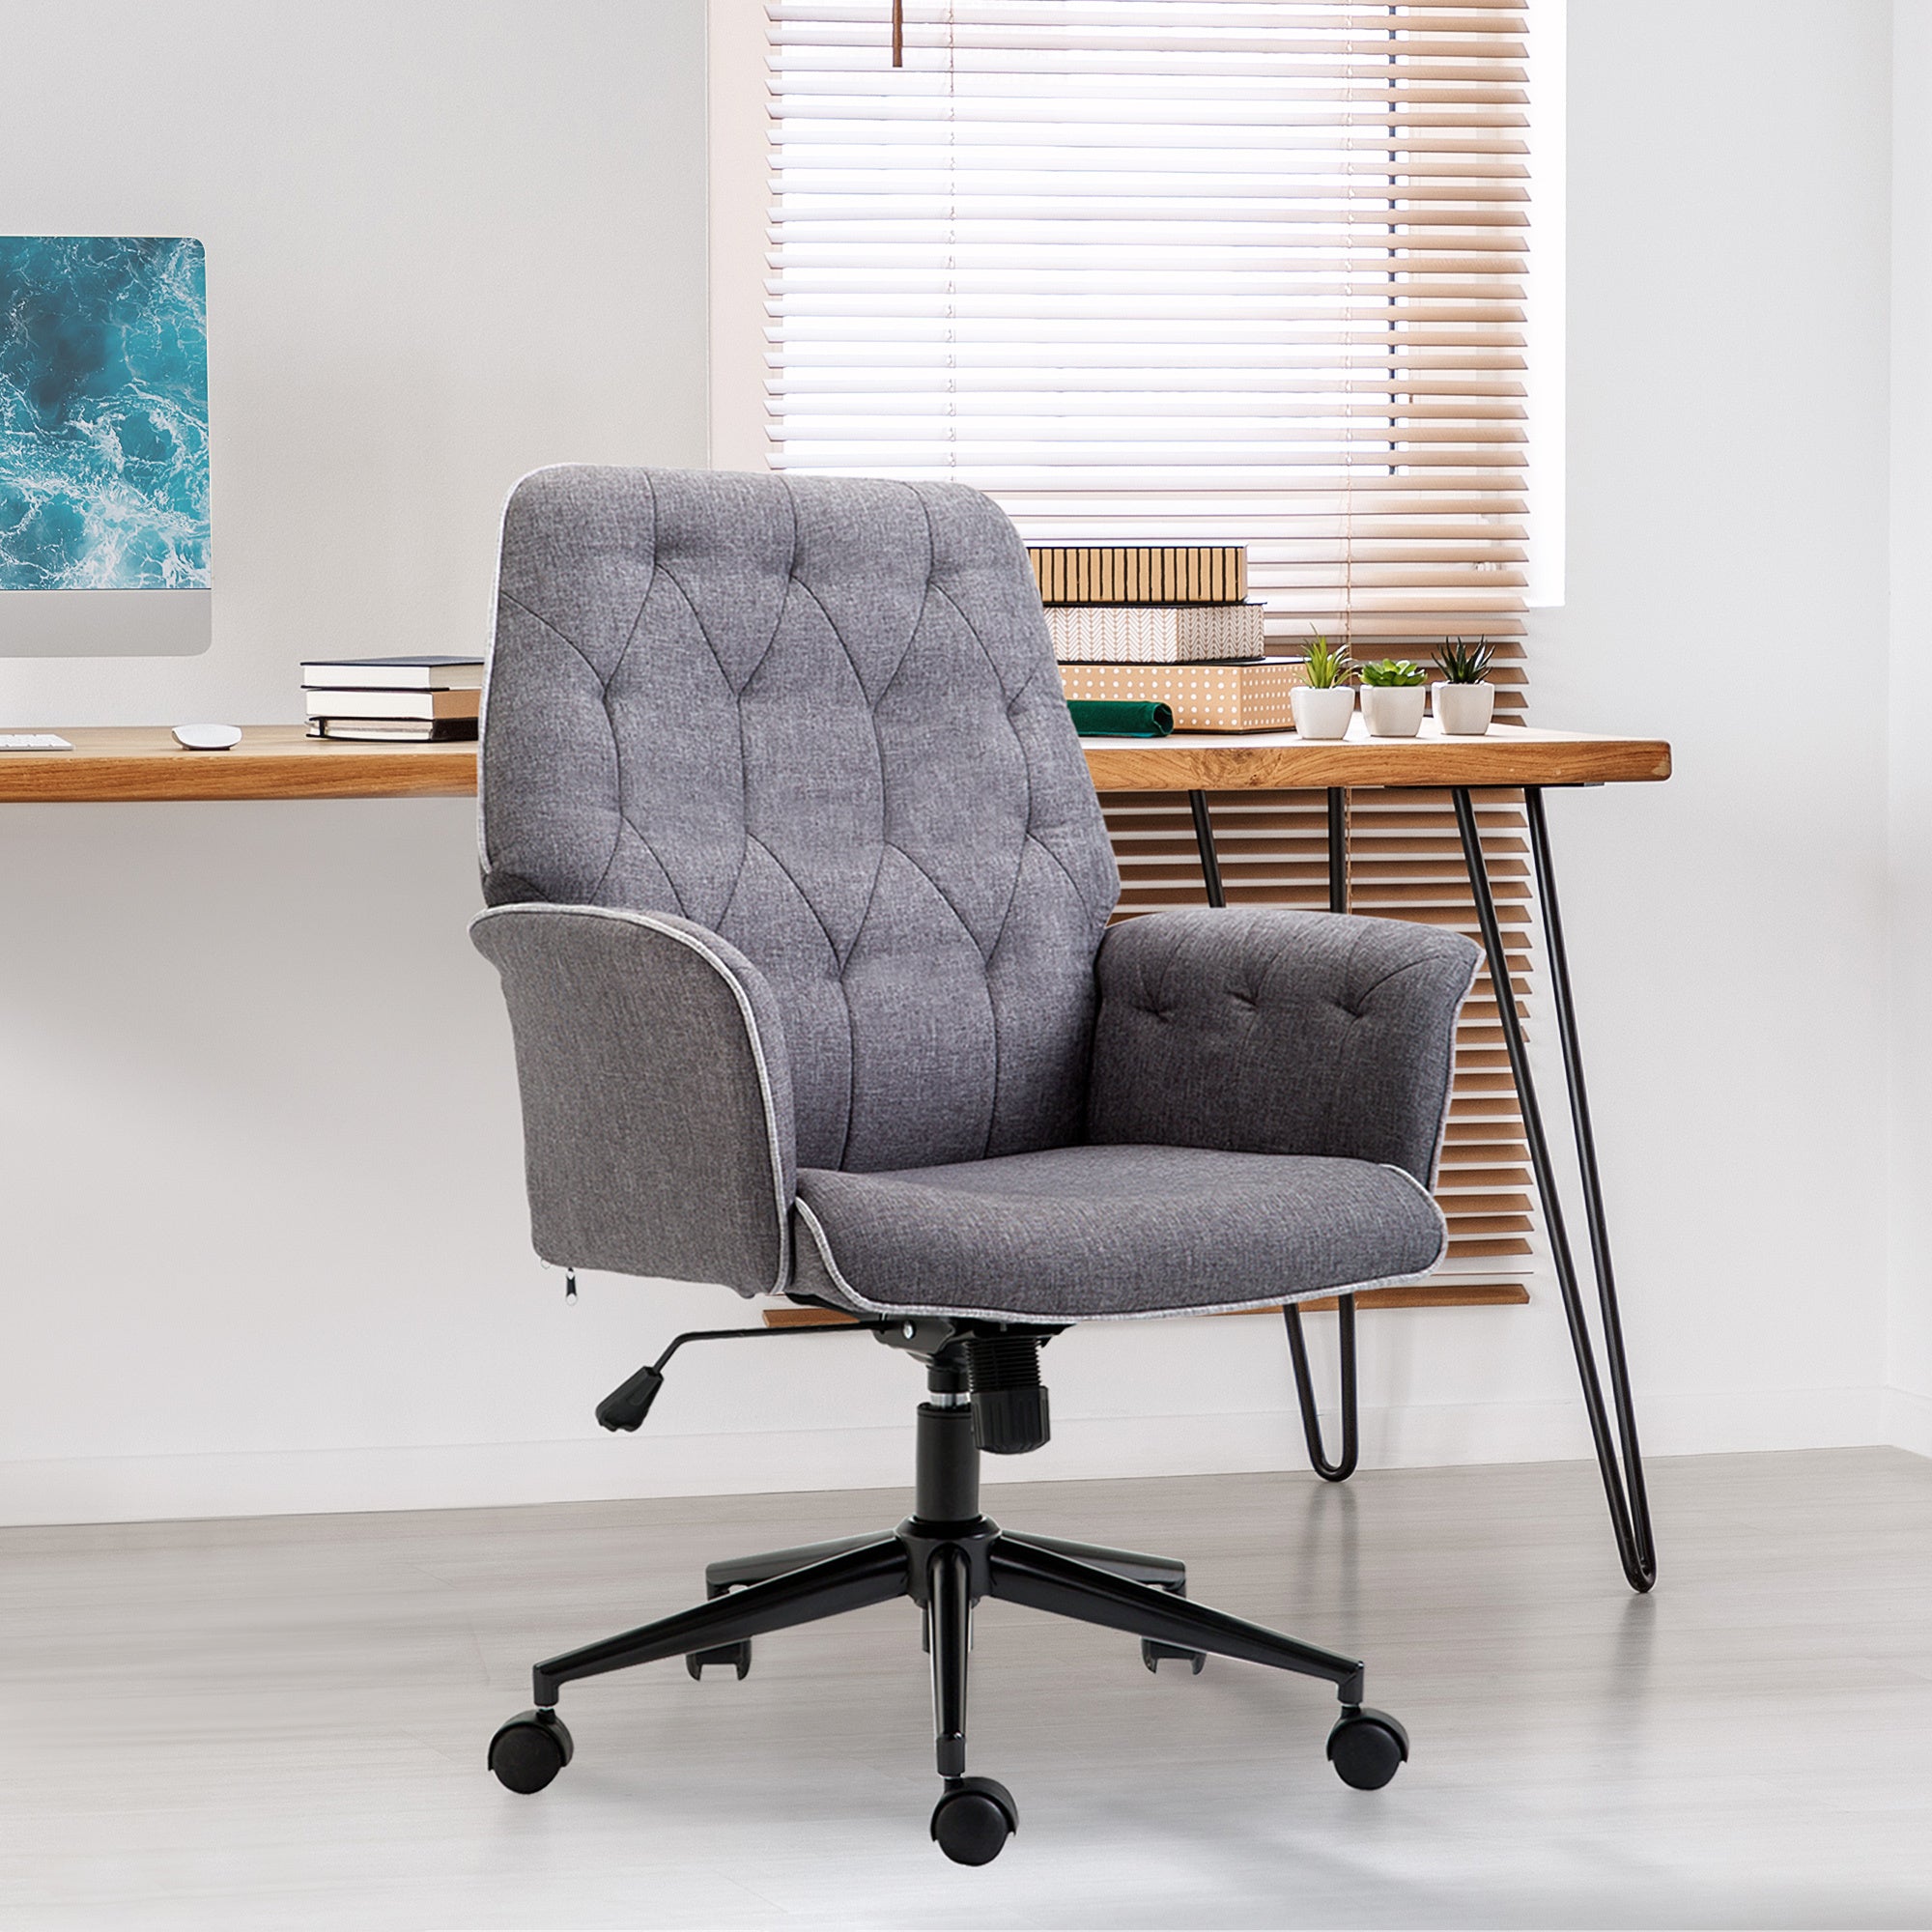 Vinsetto Linen Home Office Chair, Tufted Height Adjustable Computer Desk Chair with Swivel Wheels and Padded Armrests - Dark Gray